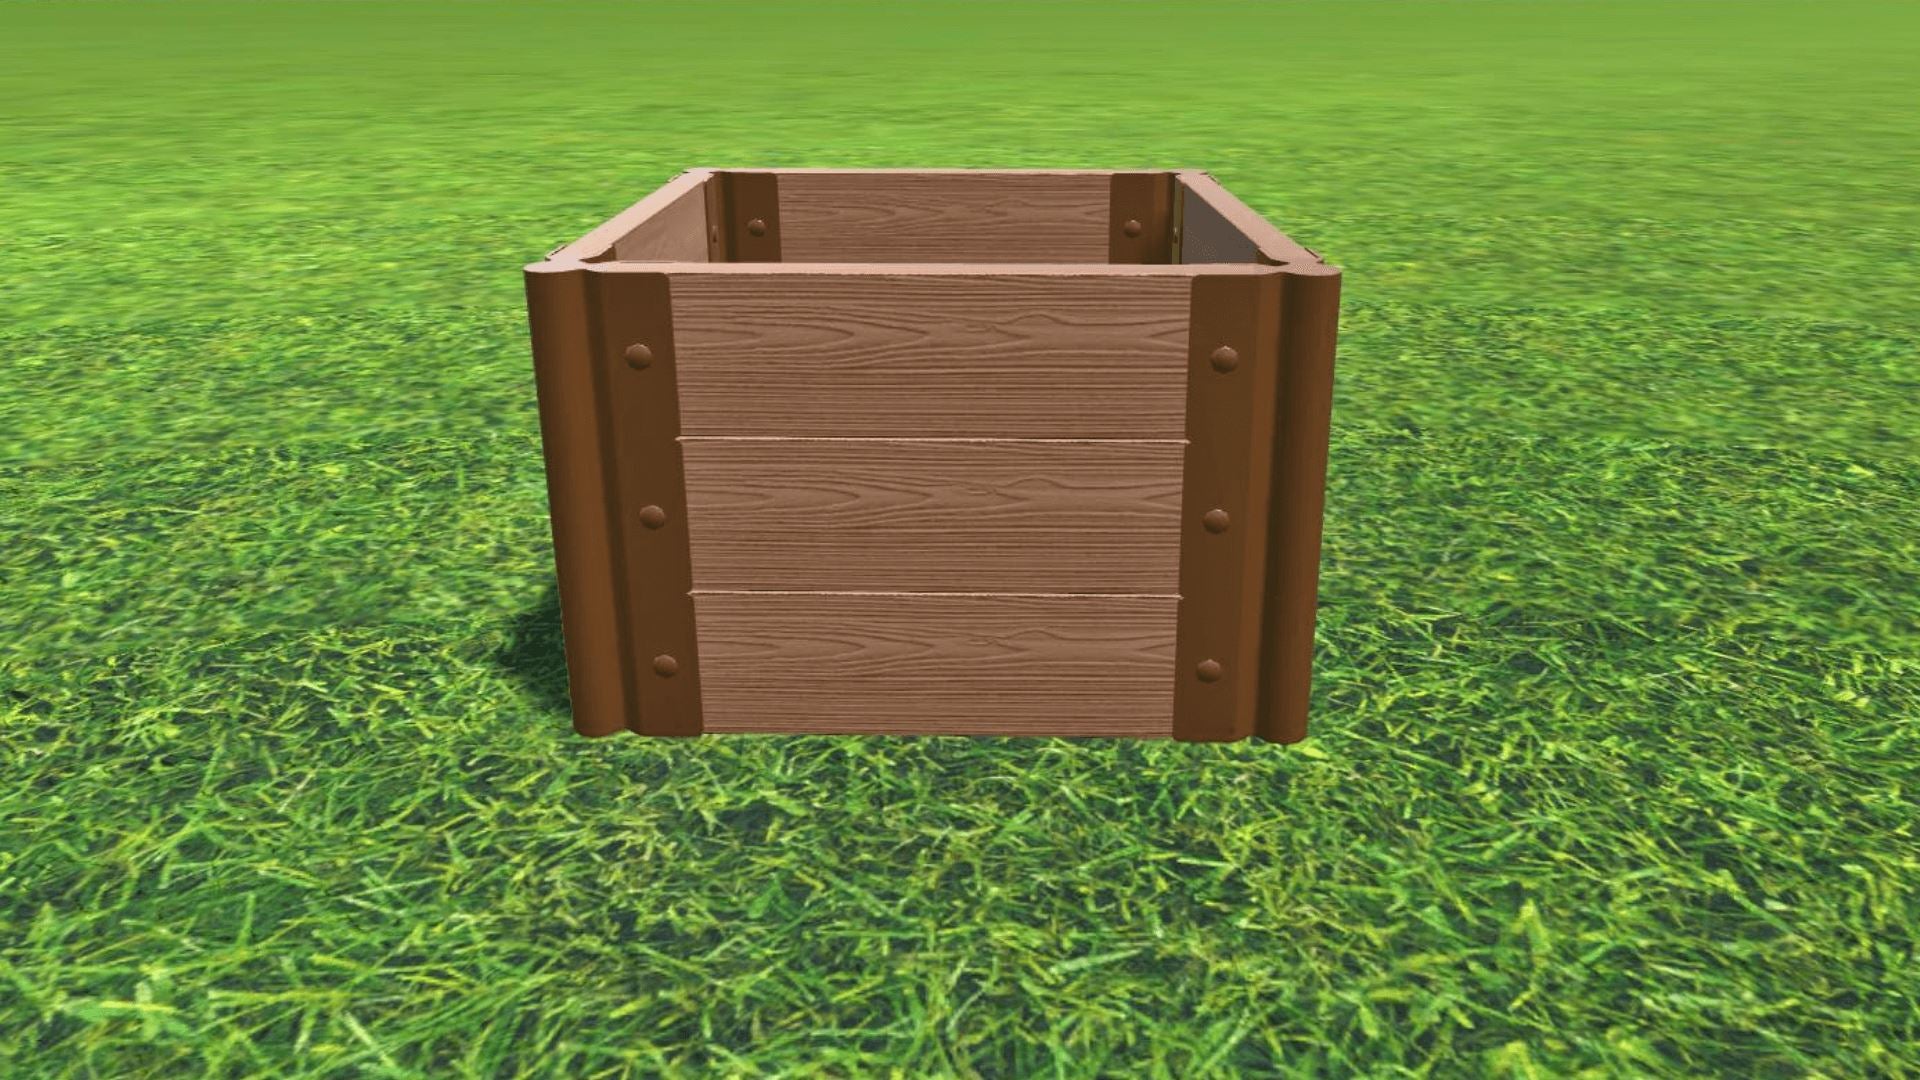 Tool-Free 2' x 2' Raised Garden Bed Raised Bed Planters Frame It All Classic Sienna 2" 3 = 16.5"